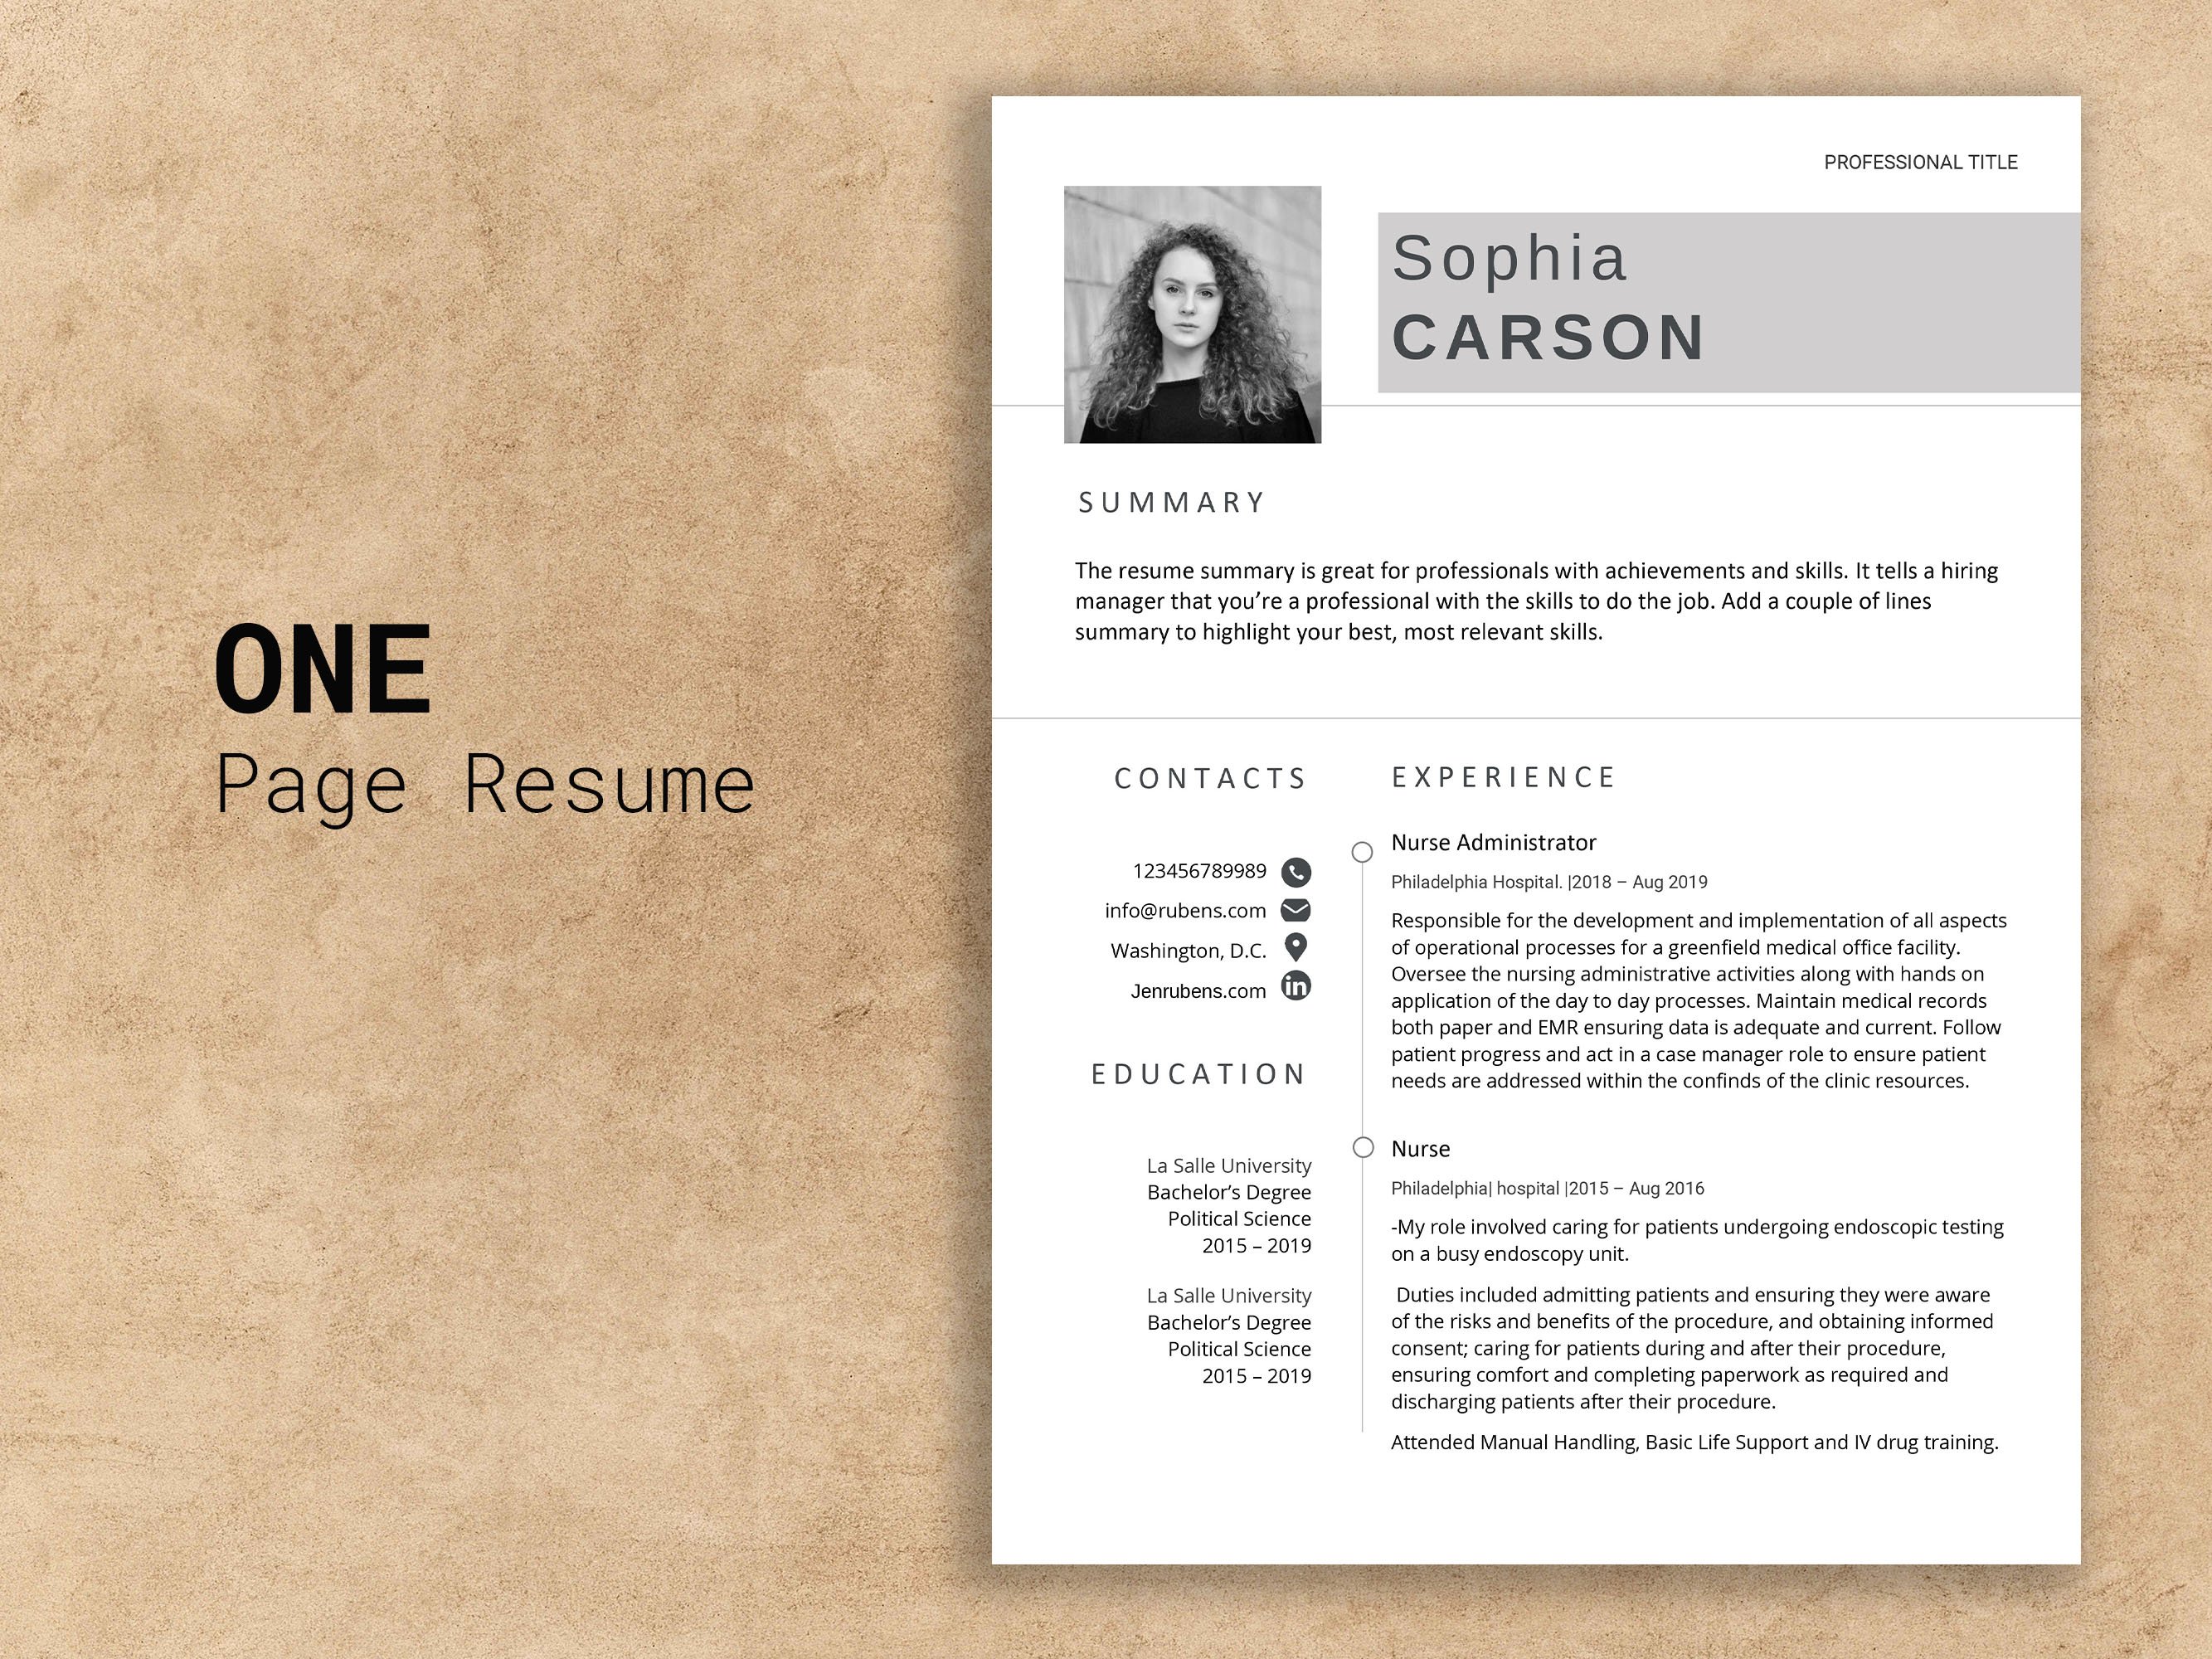 Professional resume is displayed on a piece of paper.